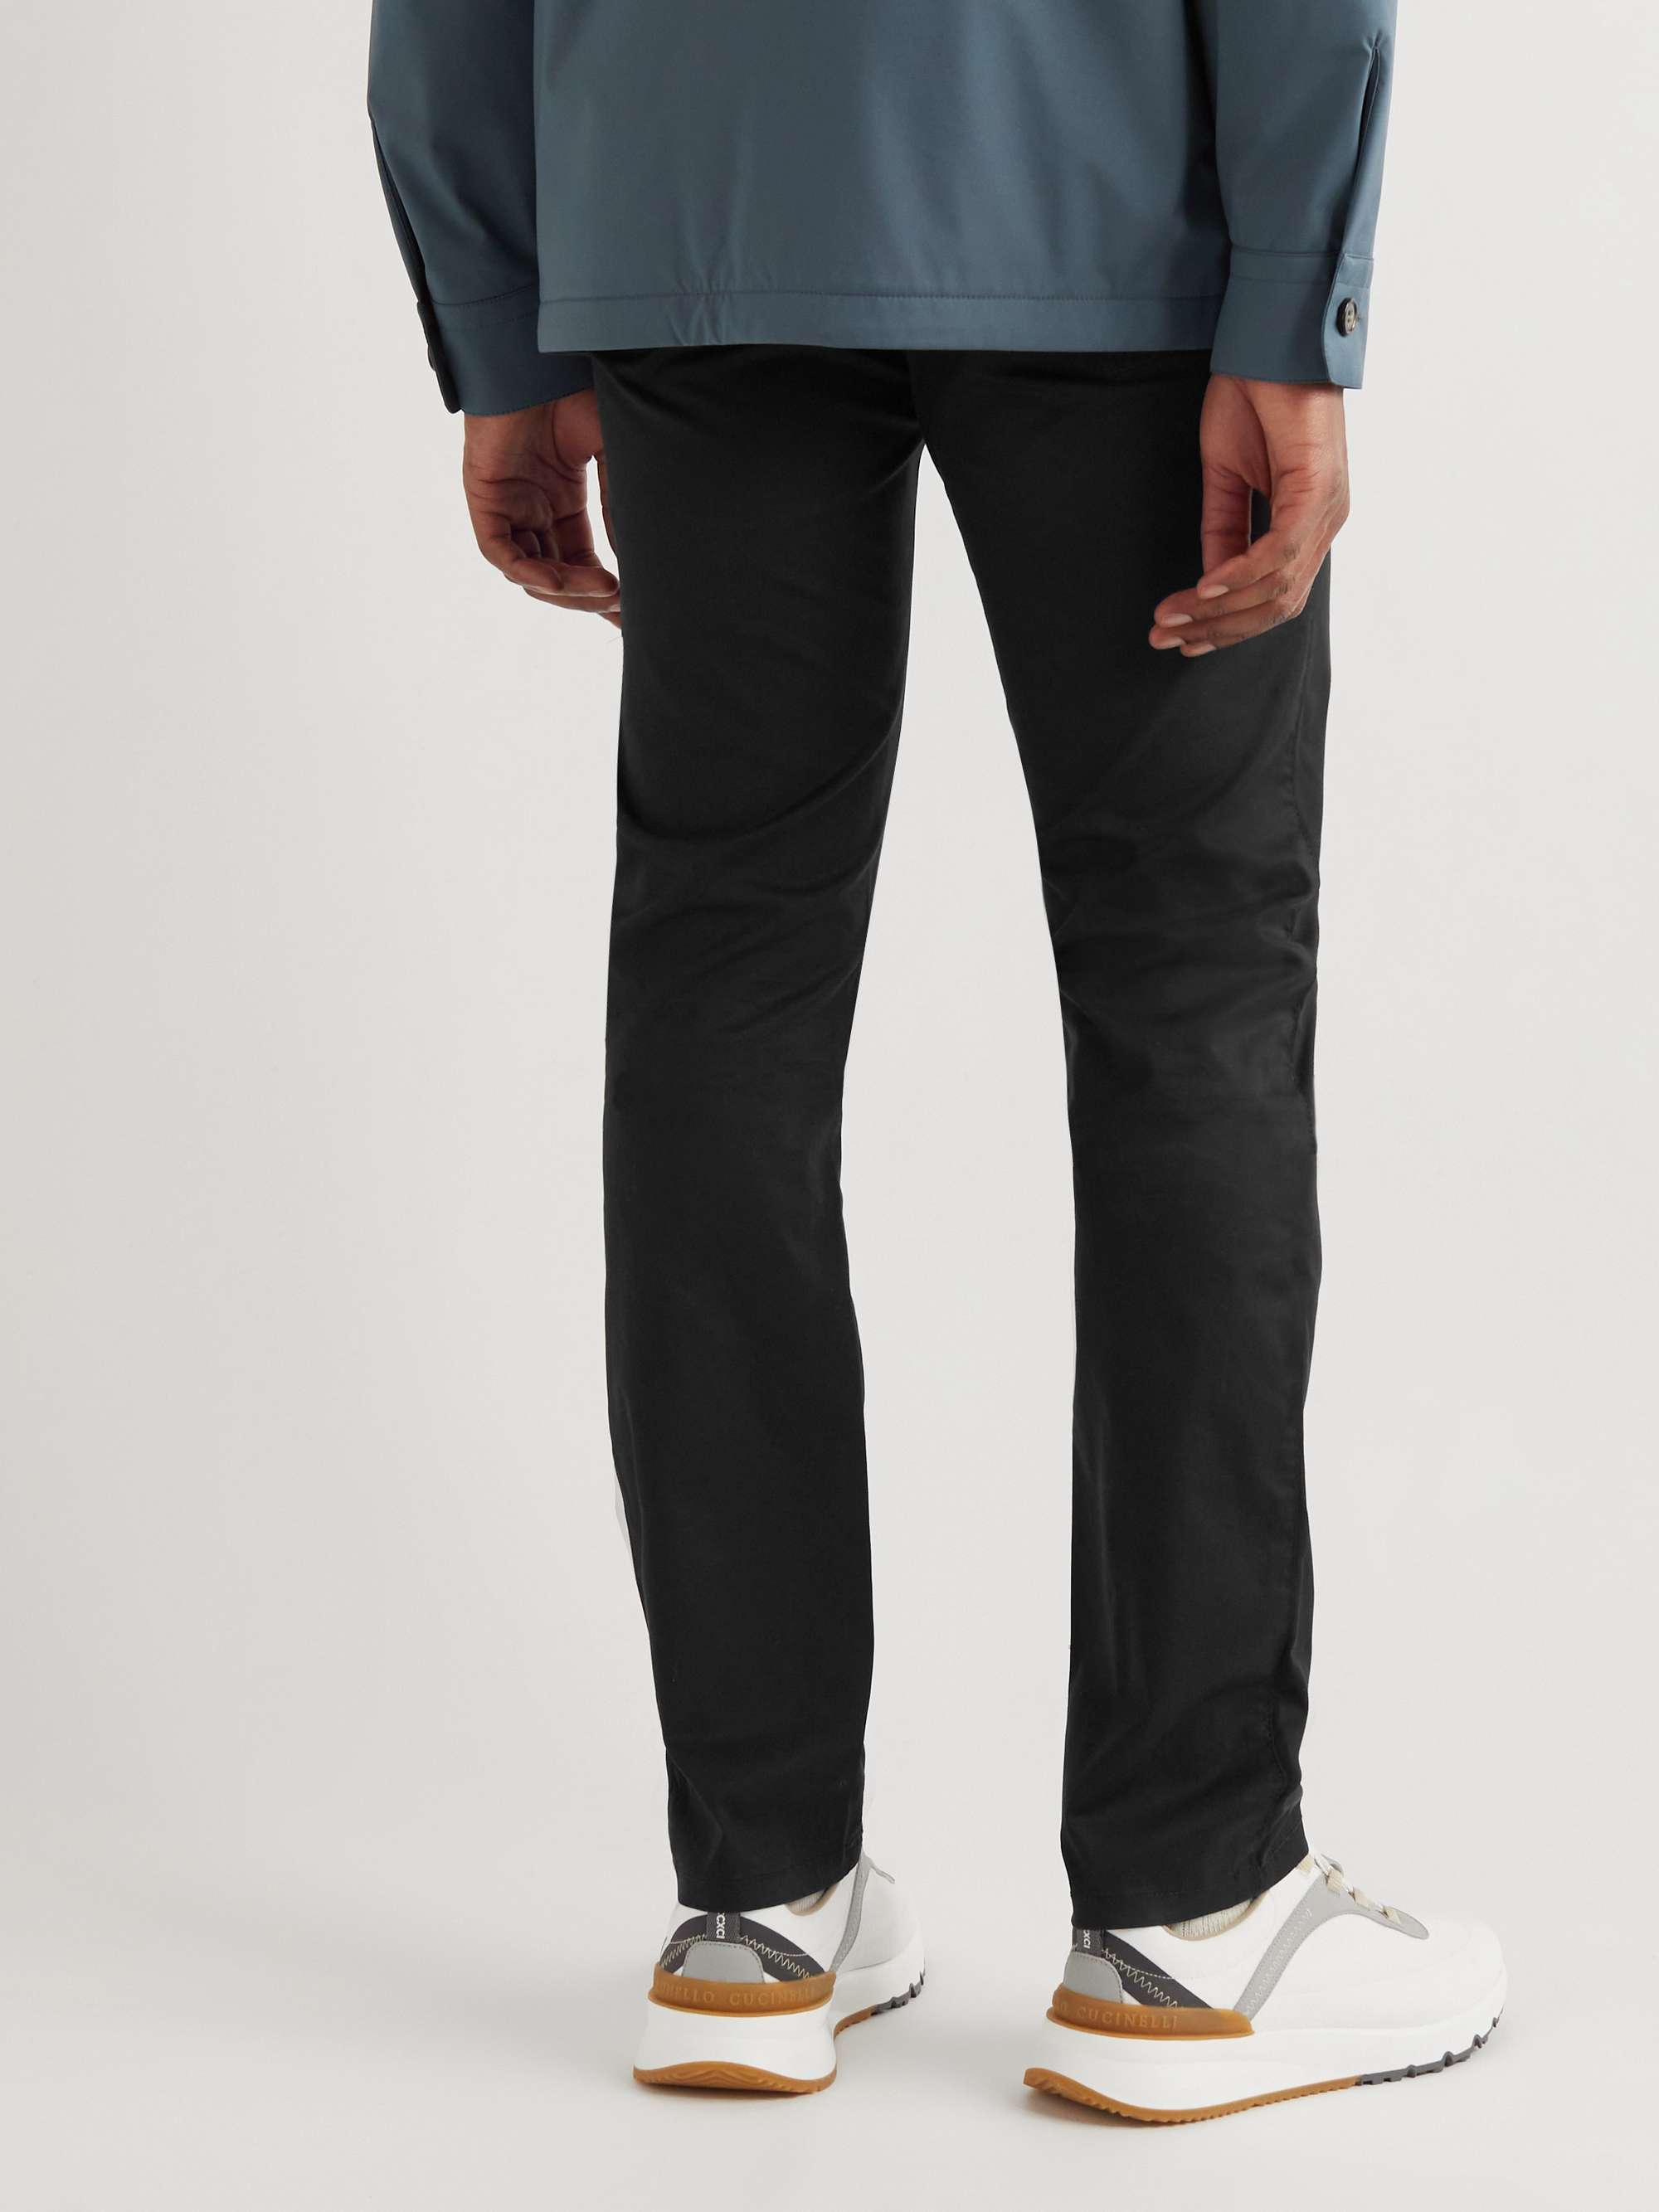 ZEGNA Slim-Fit Cotton-Blend Twill Trousers